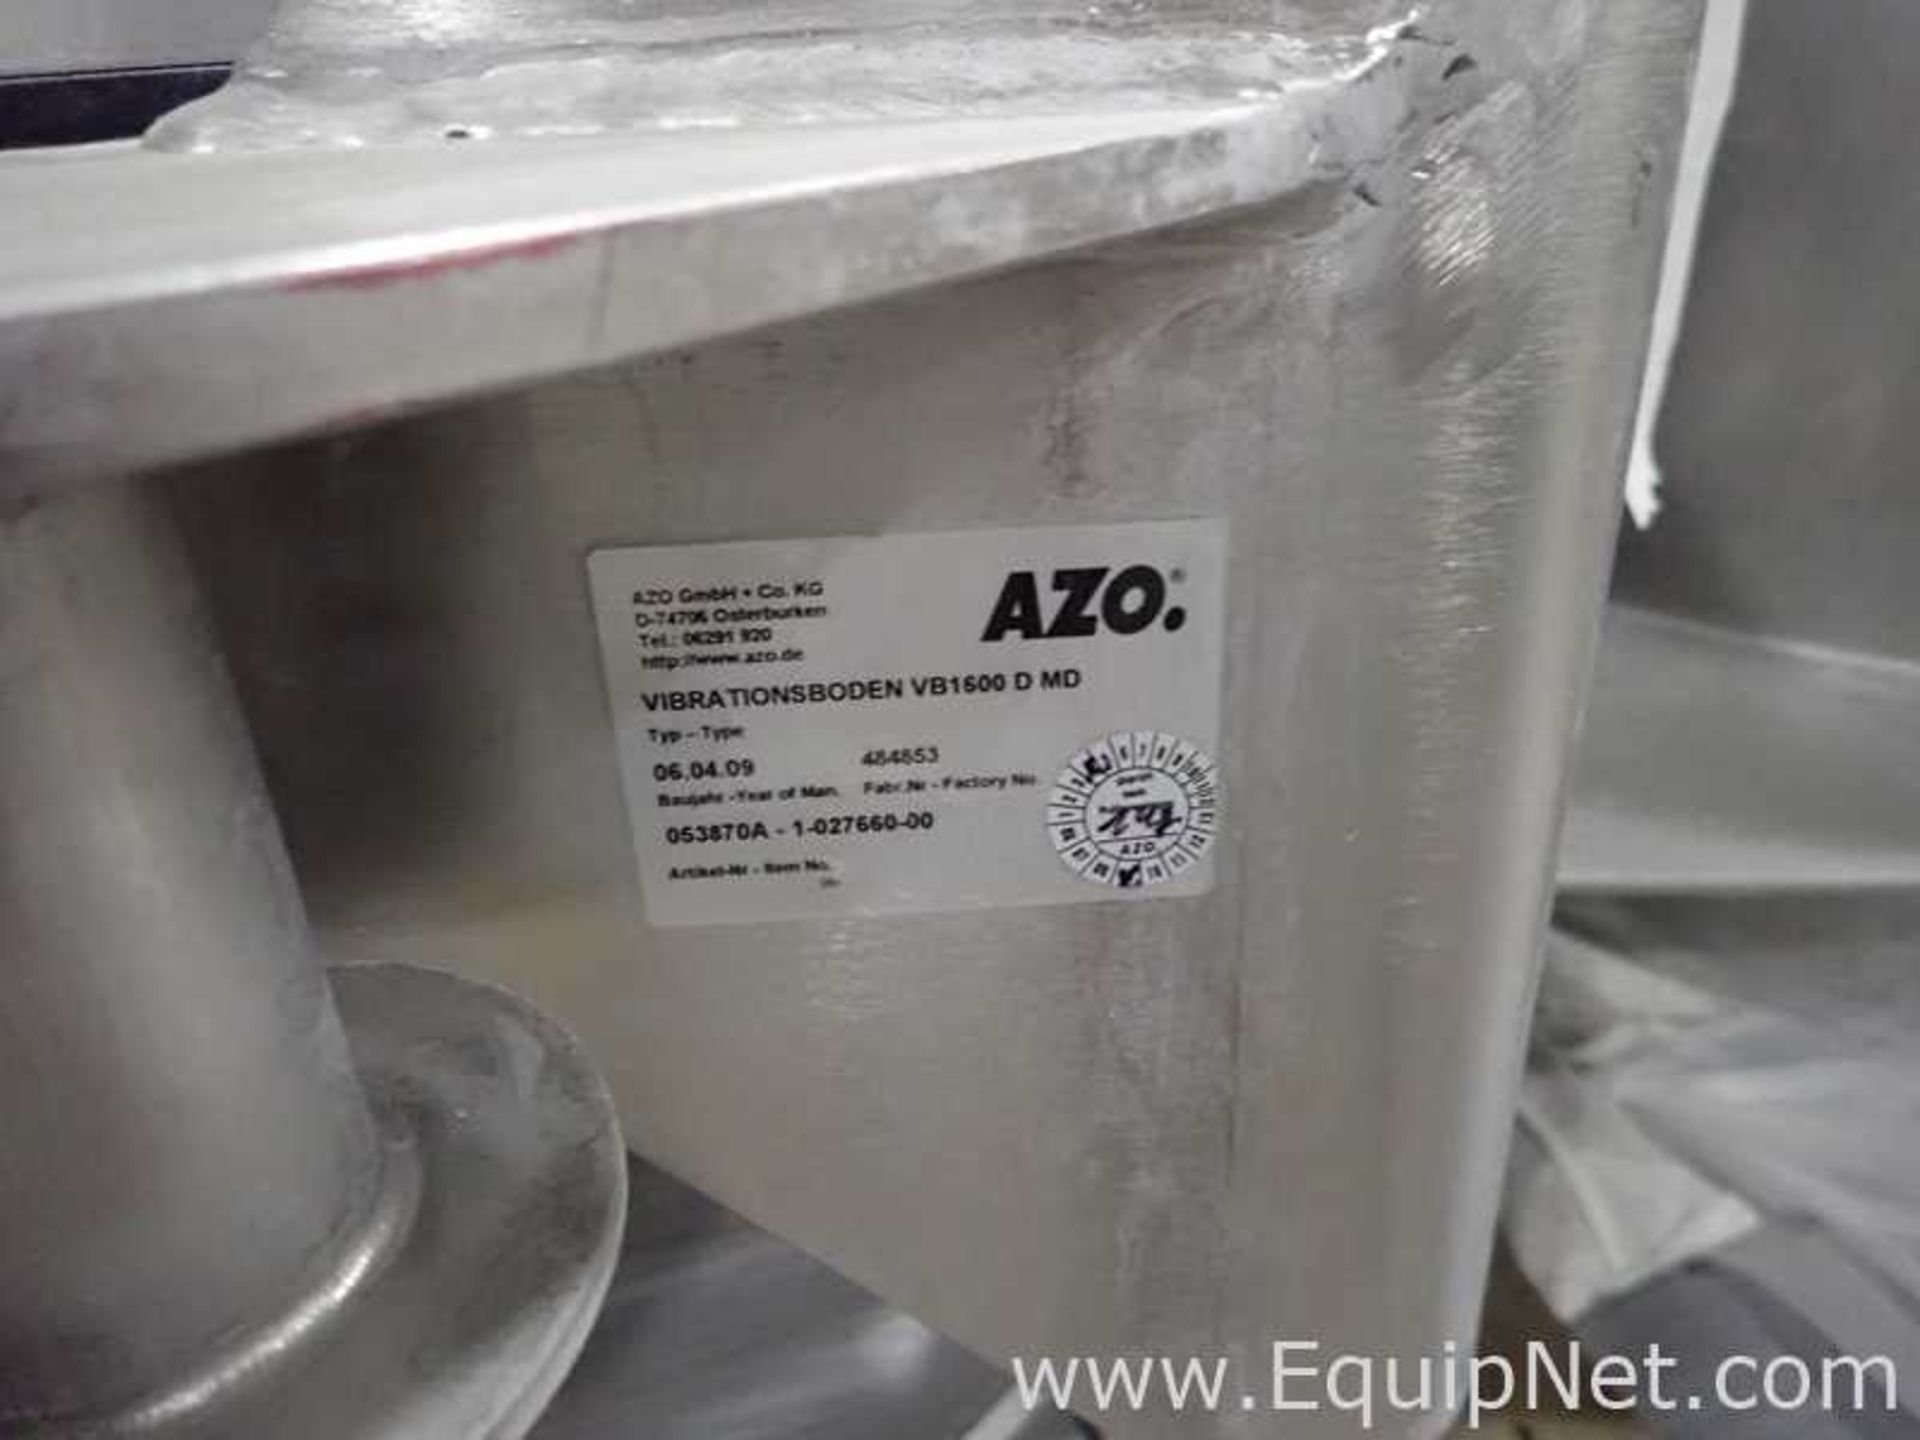 AZO Raw Material Production Equipment - Image 17 of 21